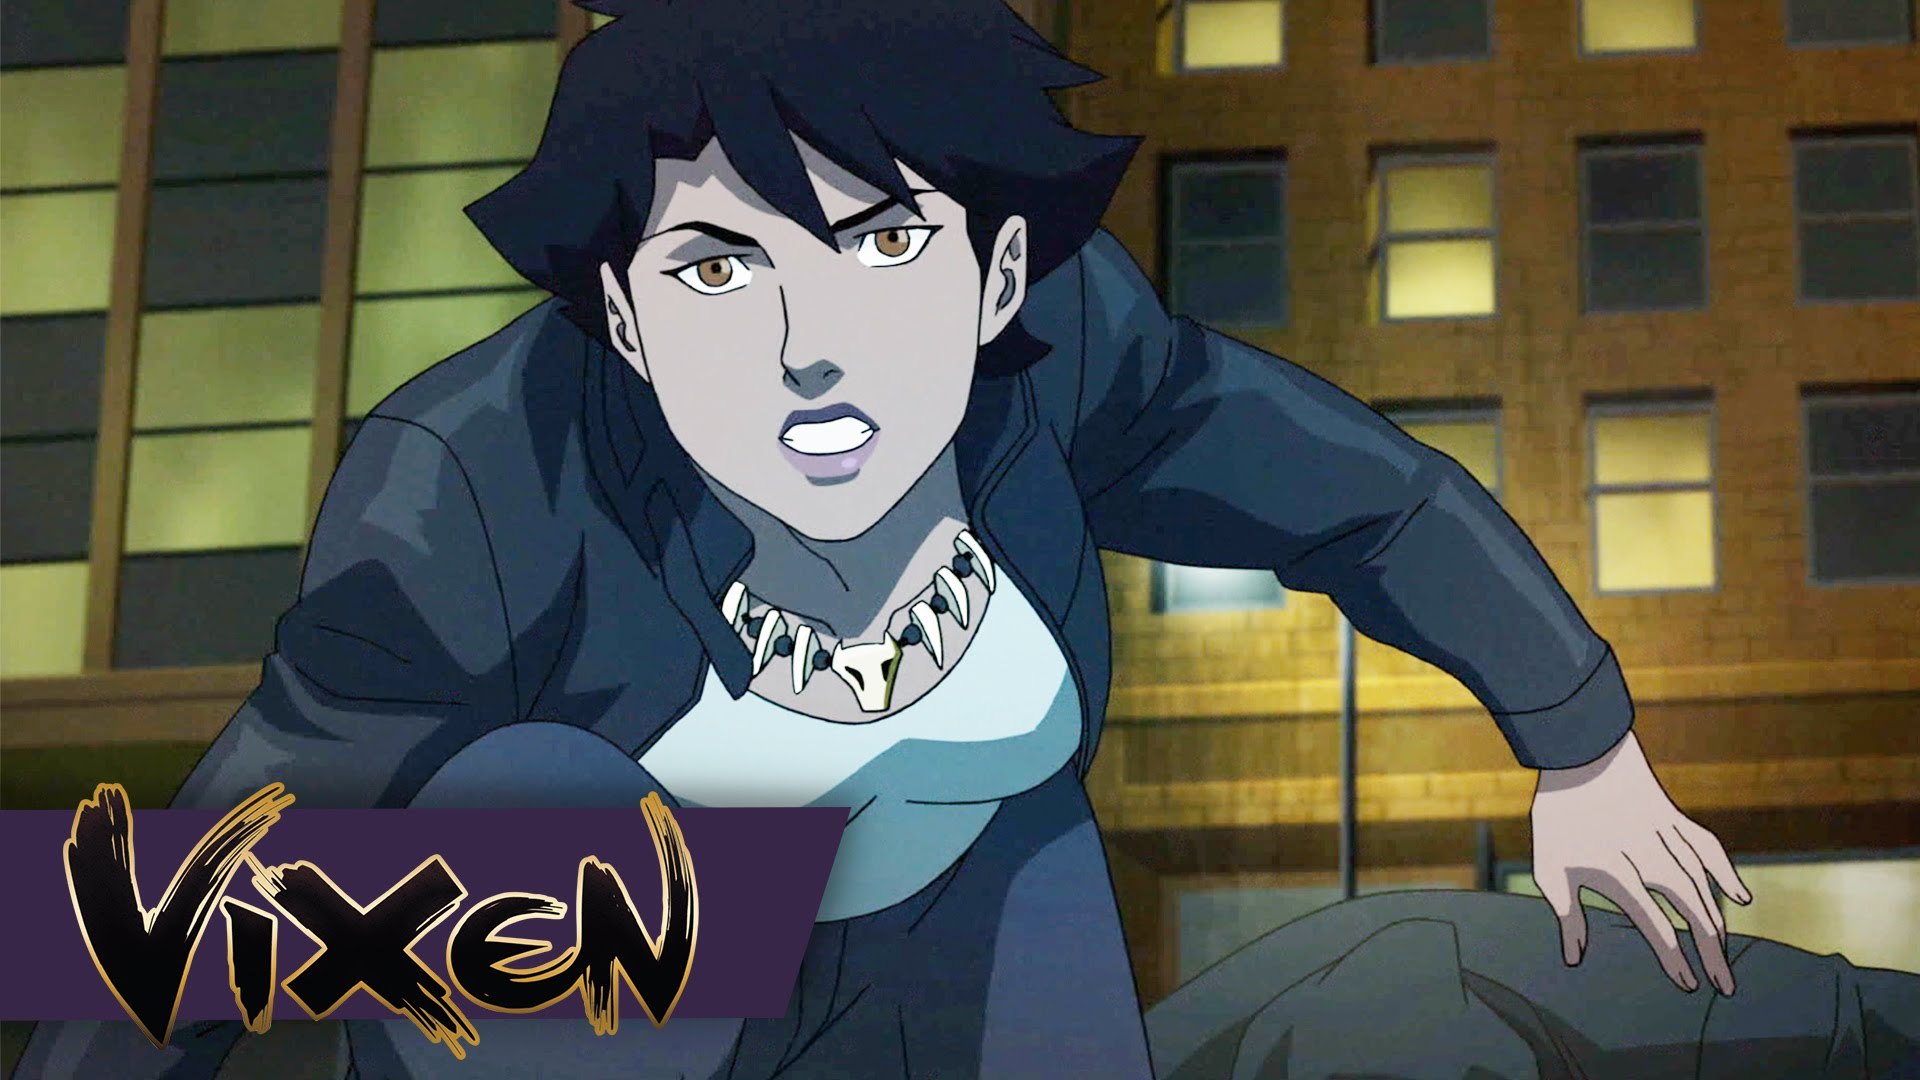 The CW's Animated 'Vixen' Pilot Now Online | Animation World Network